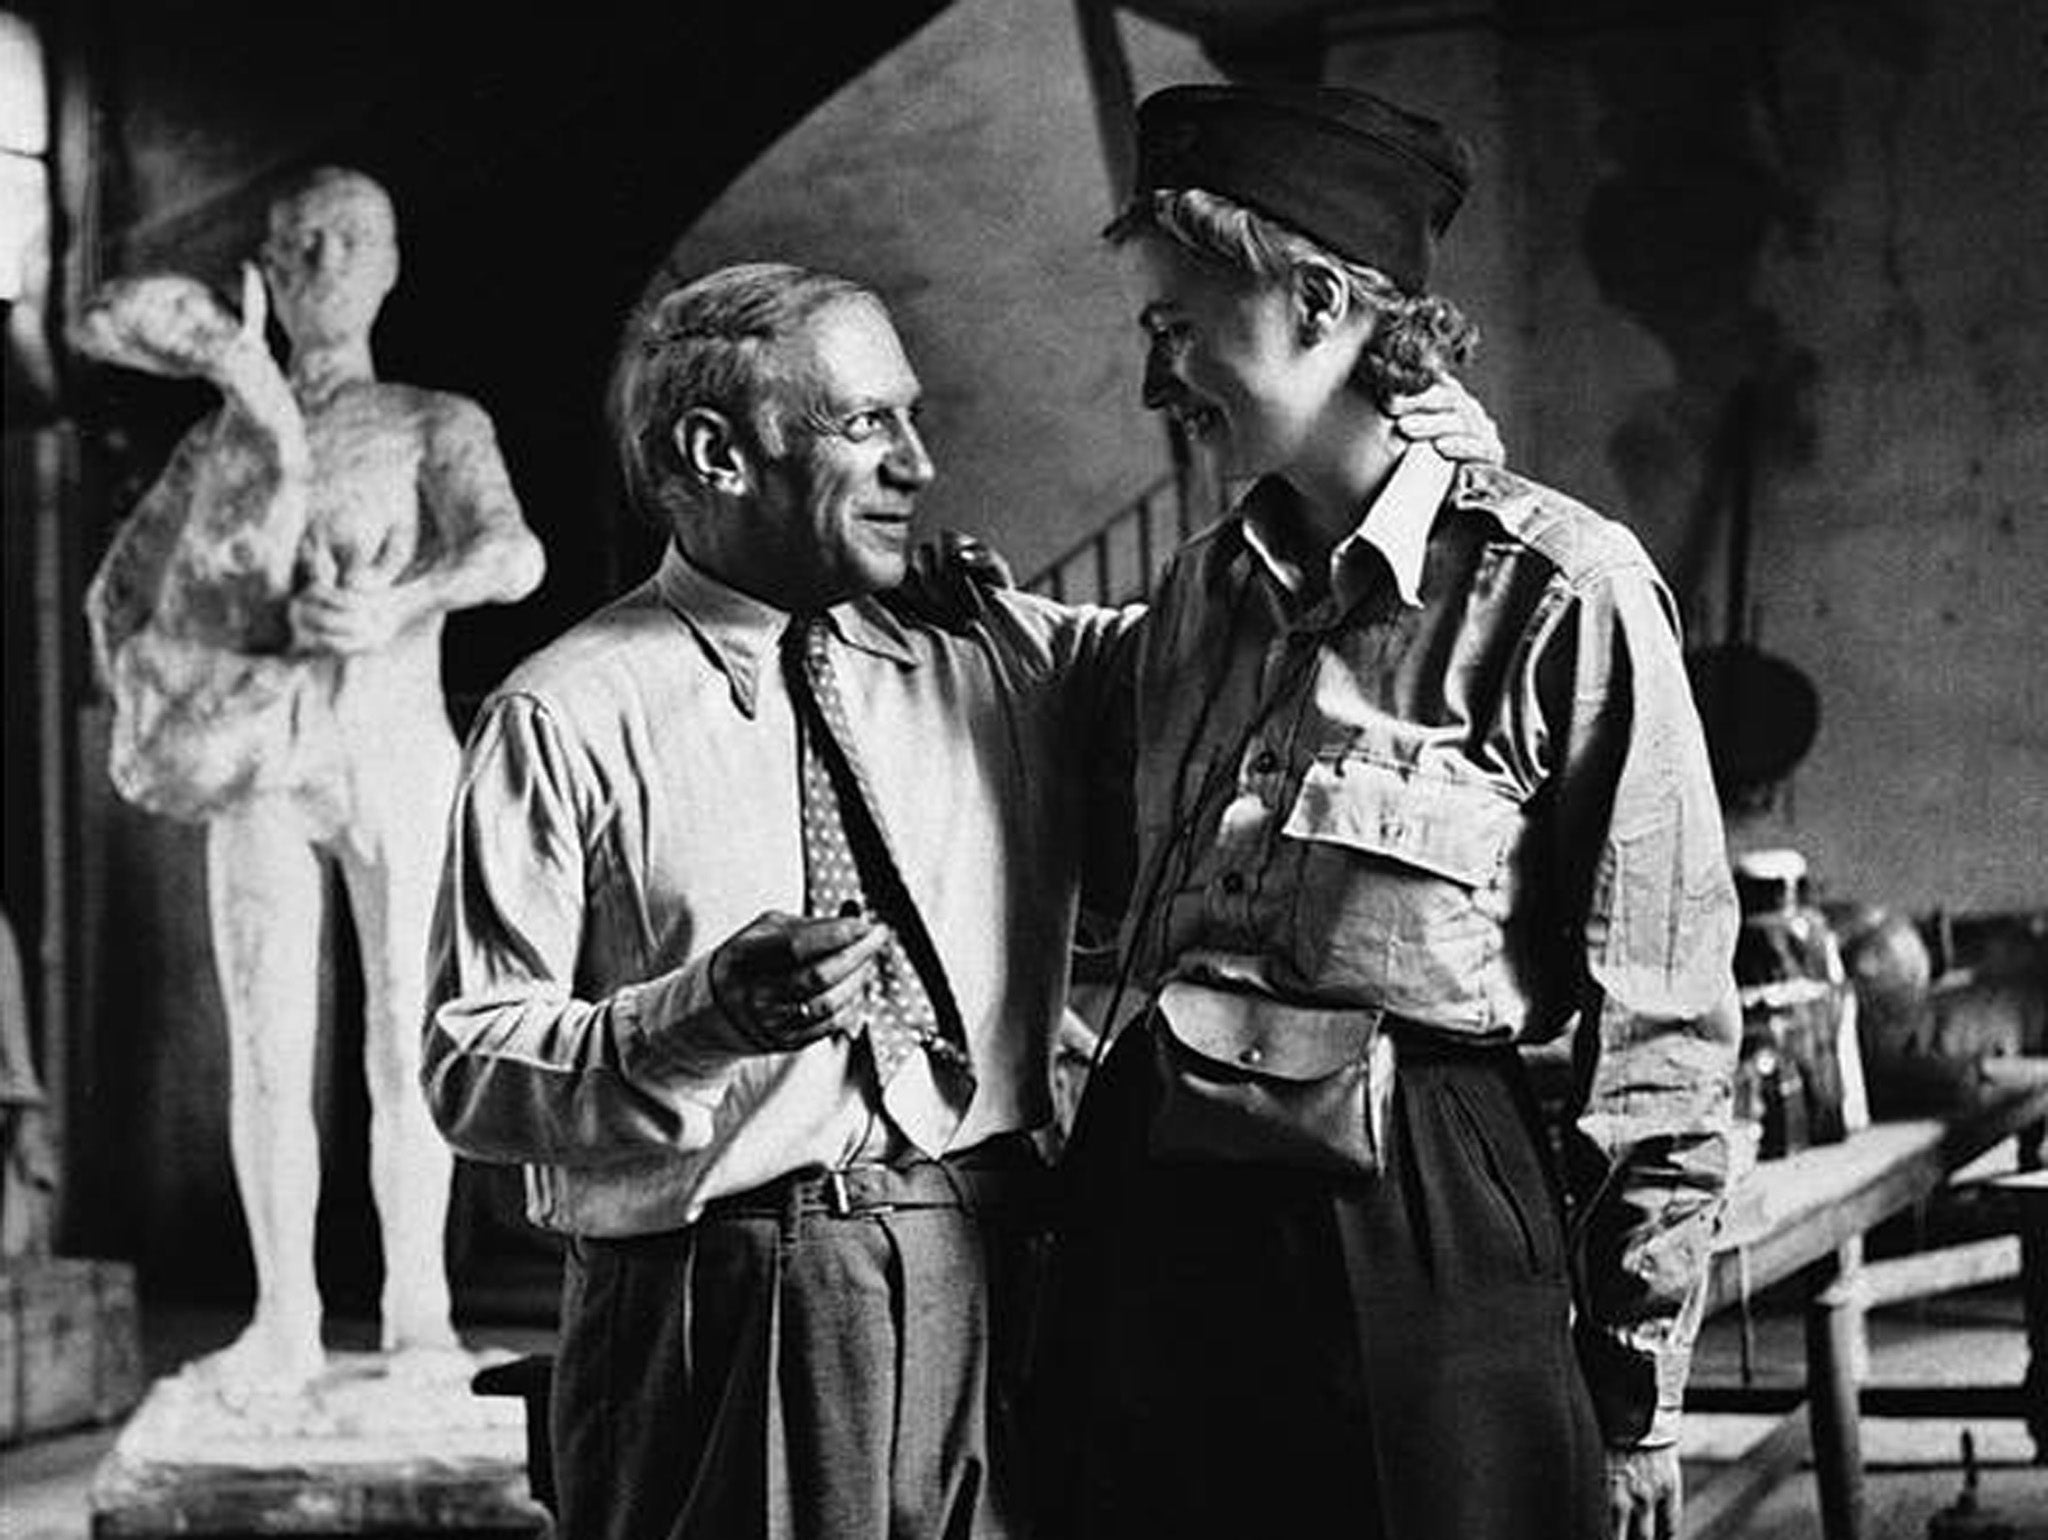 Lee Miller and Picasso after the liberation of Paris